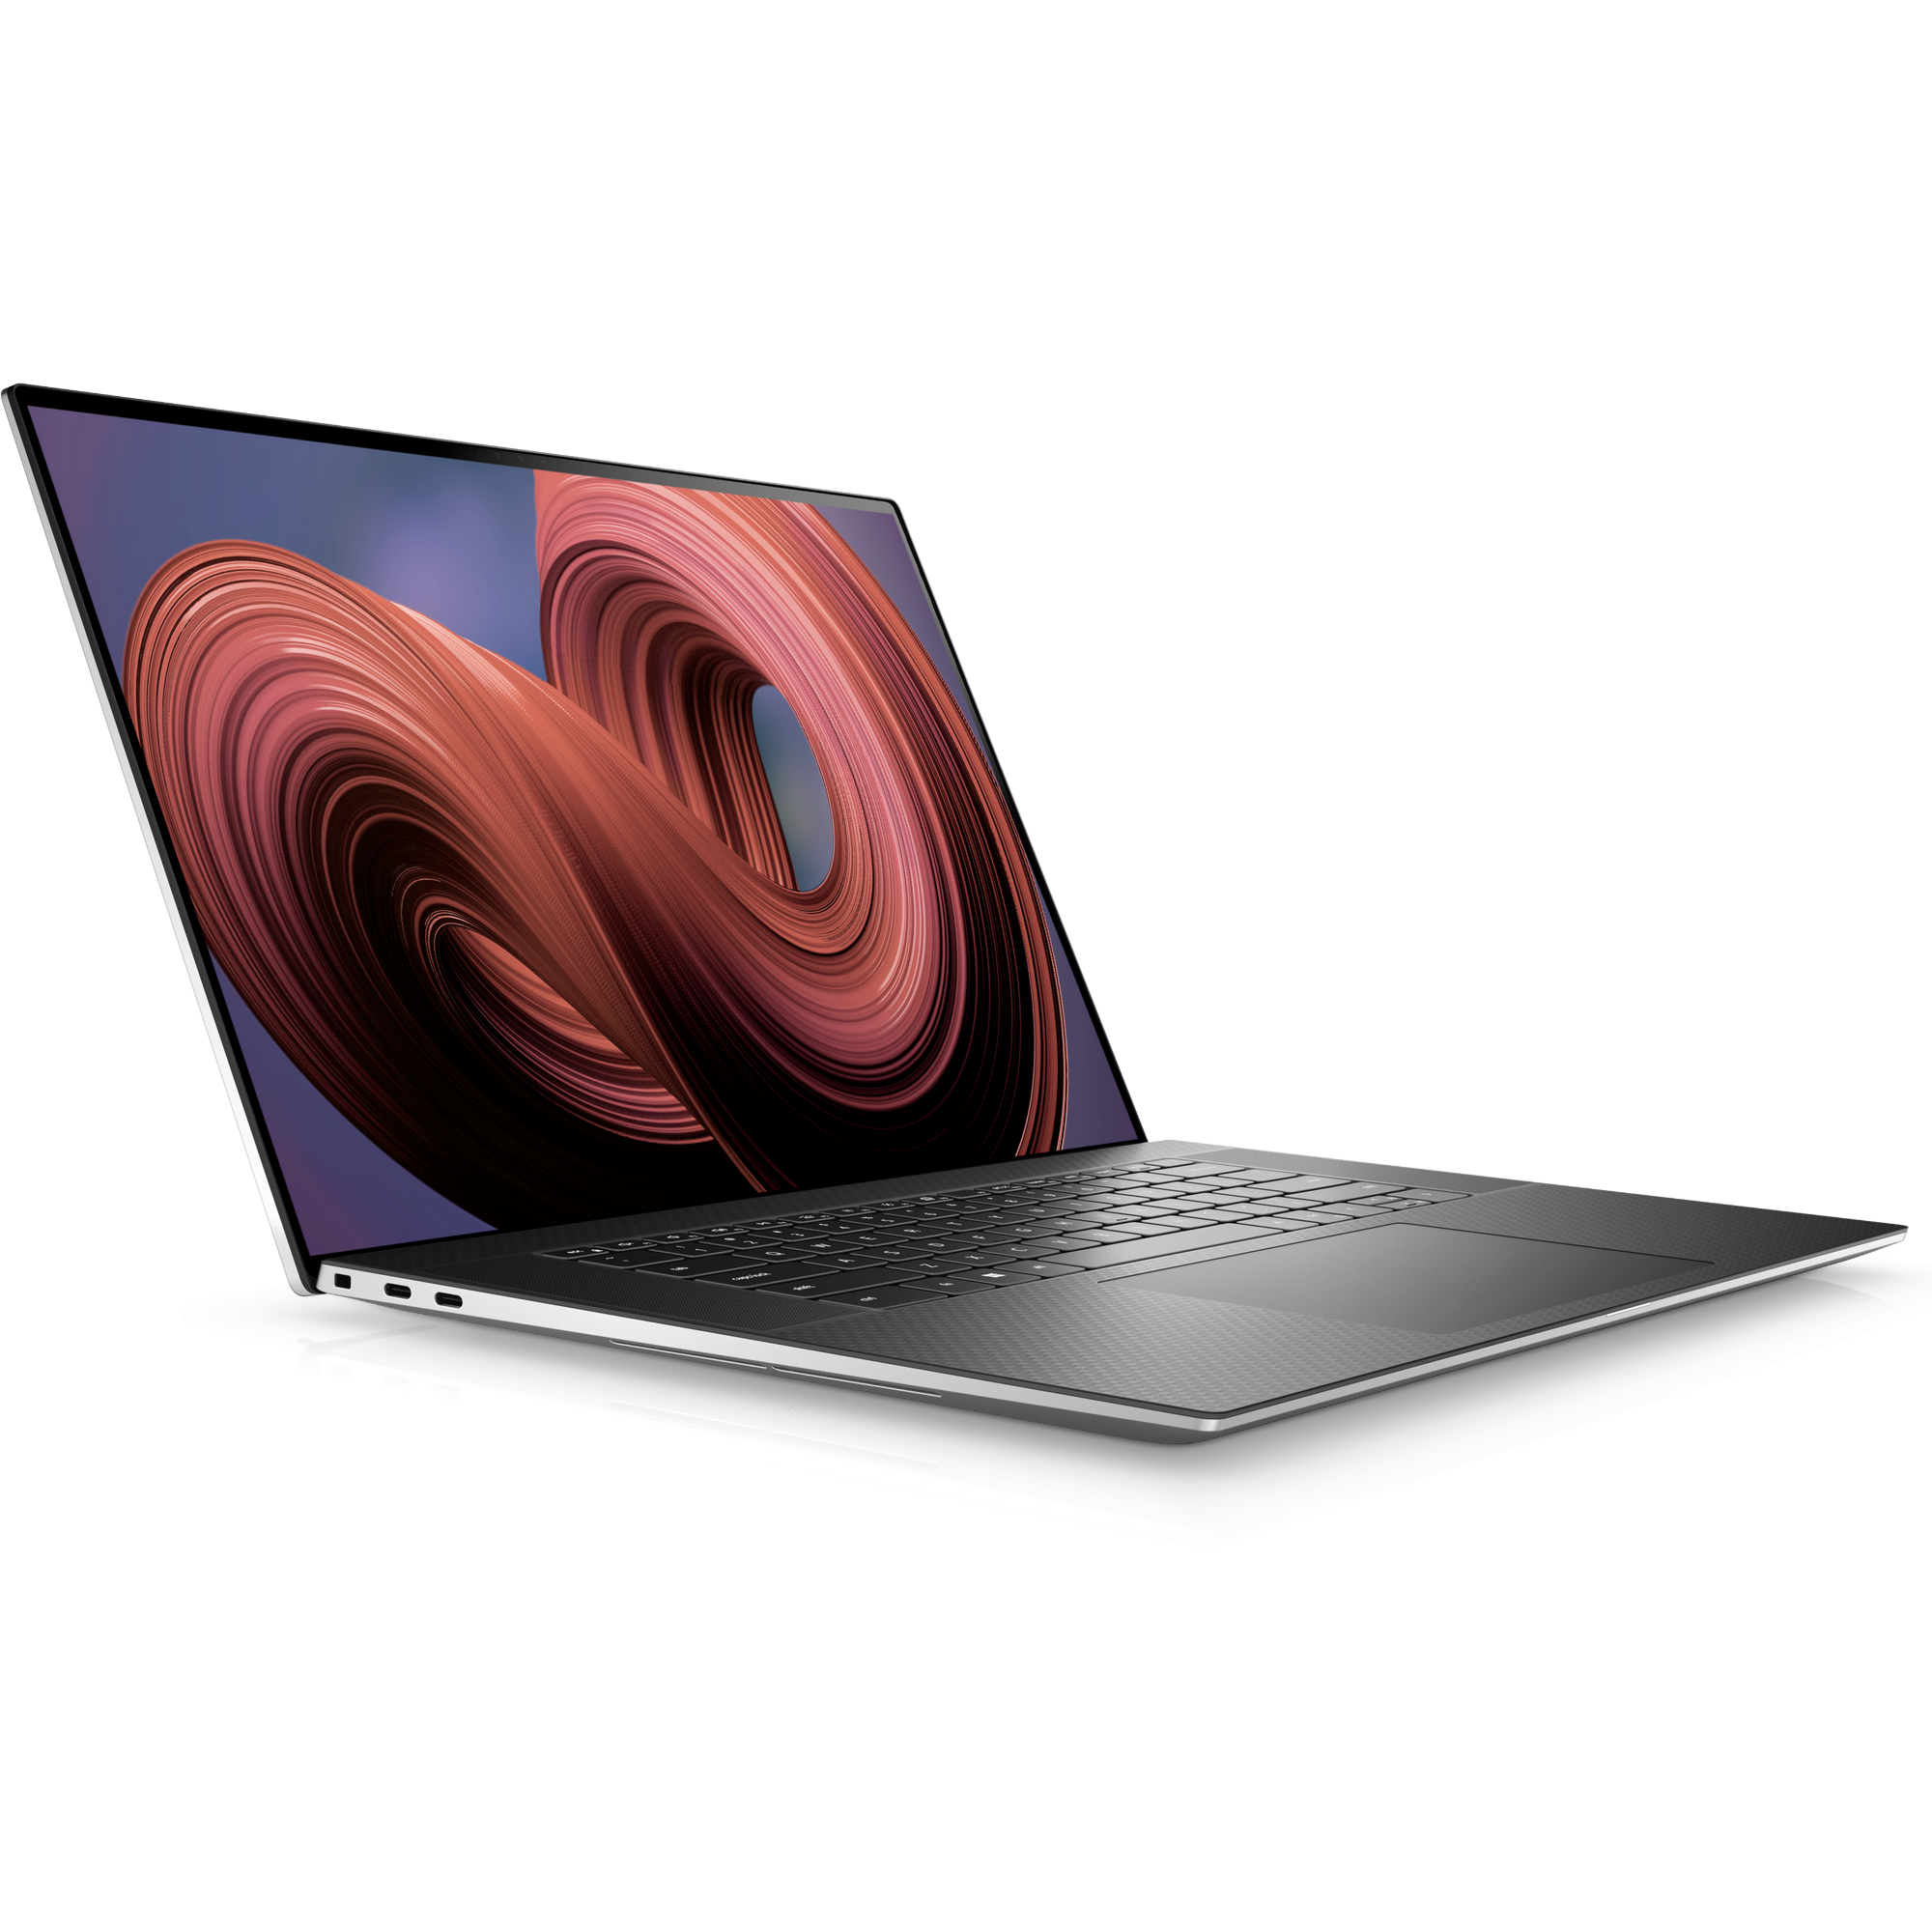 Angled front view of the Dell XPS 17 facing right